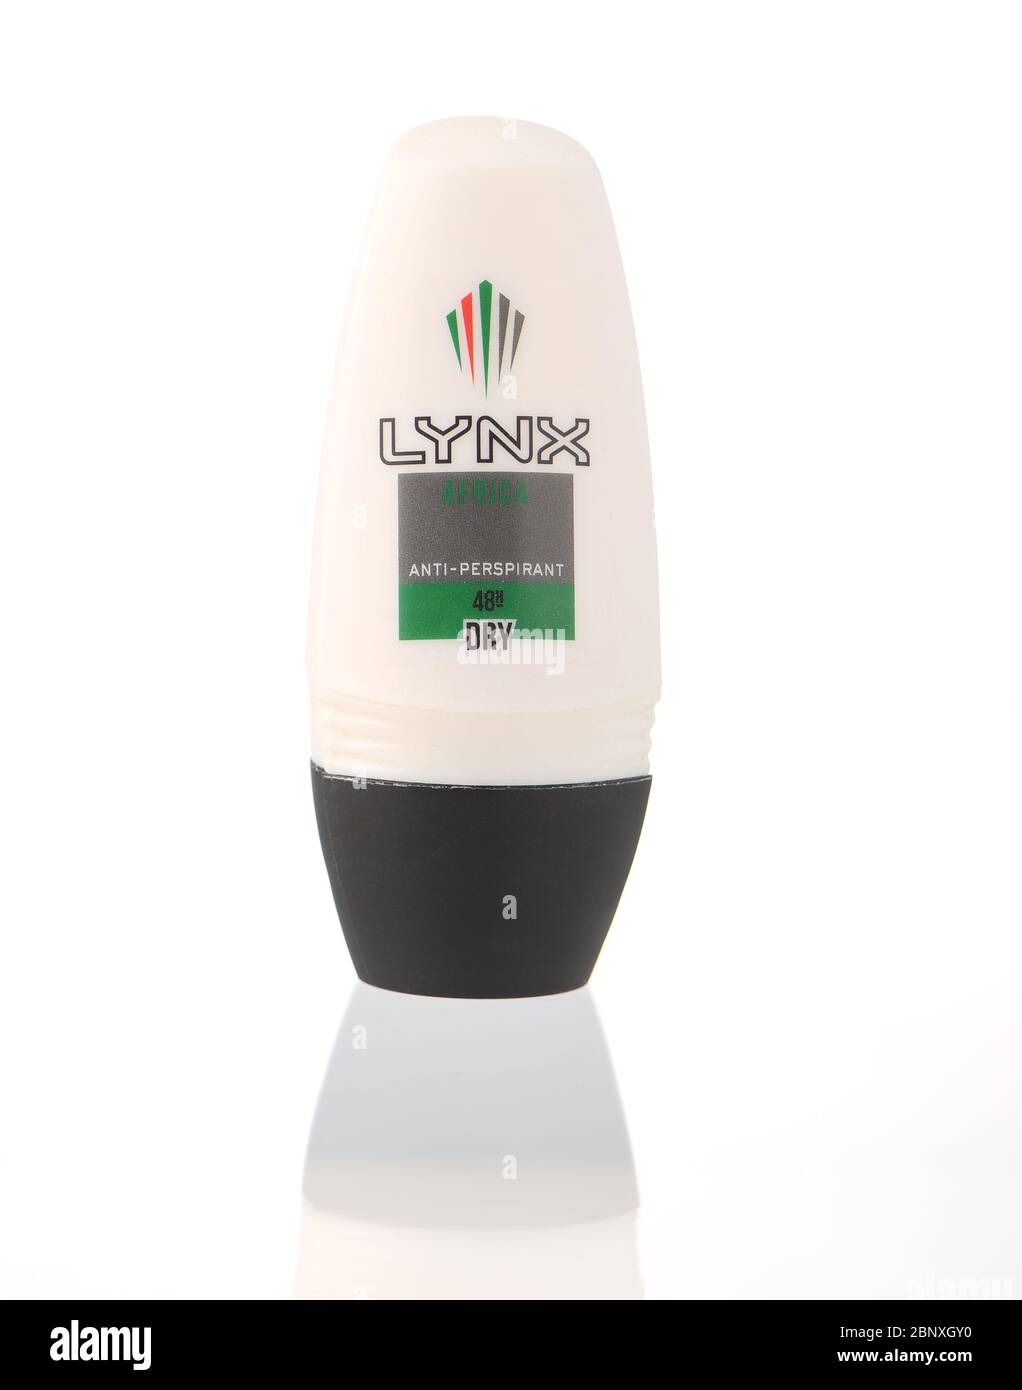 Lynx dry mans roll on deodorant isolate against a white background Stock Photo